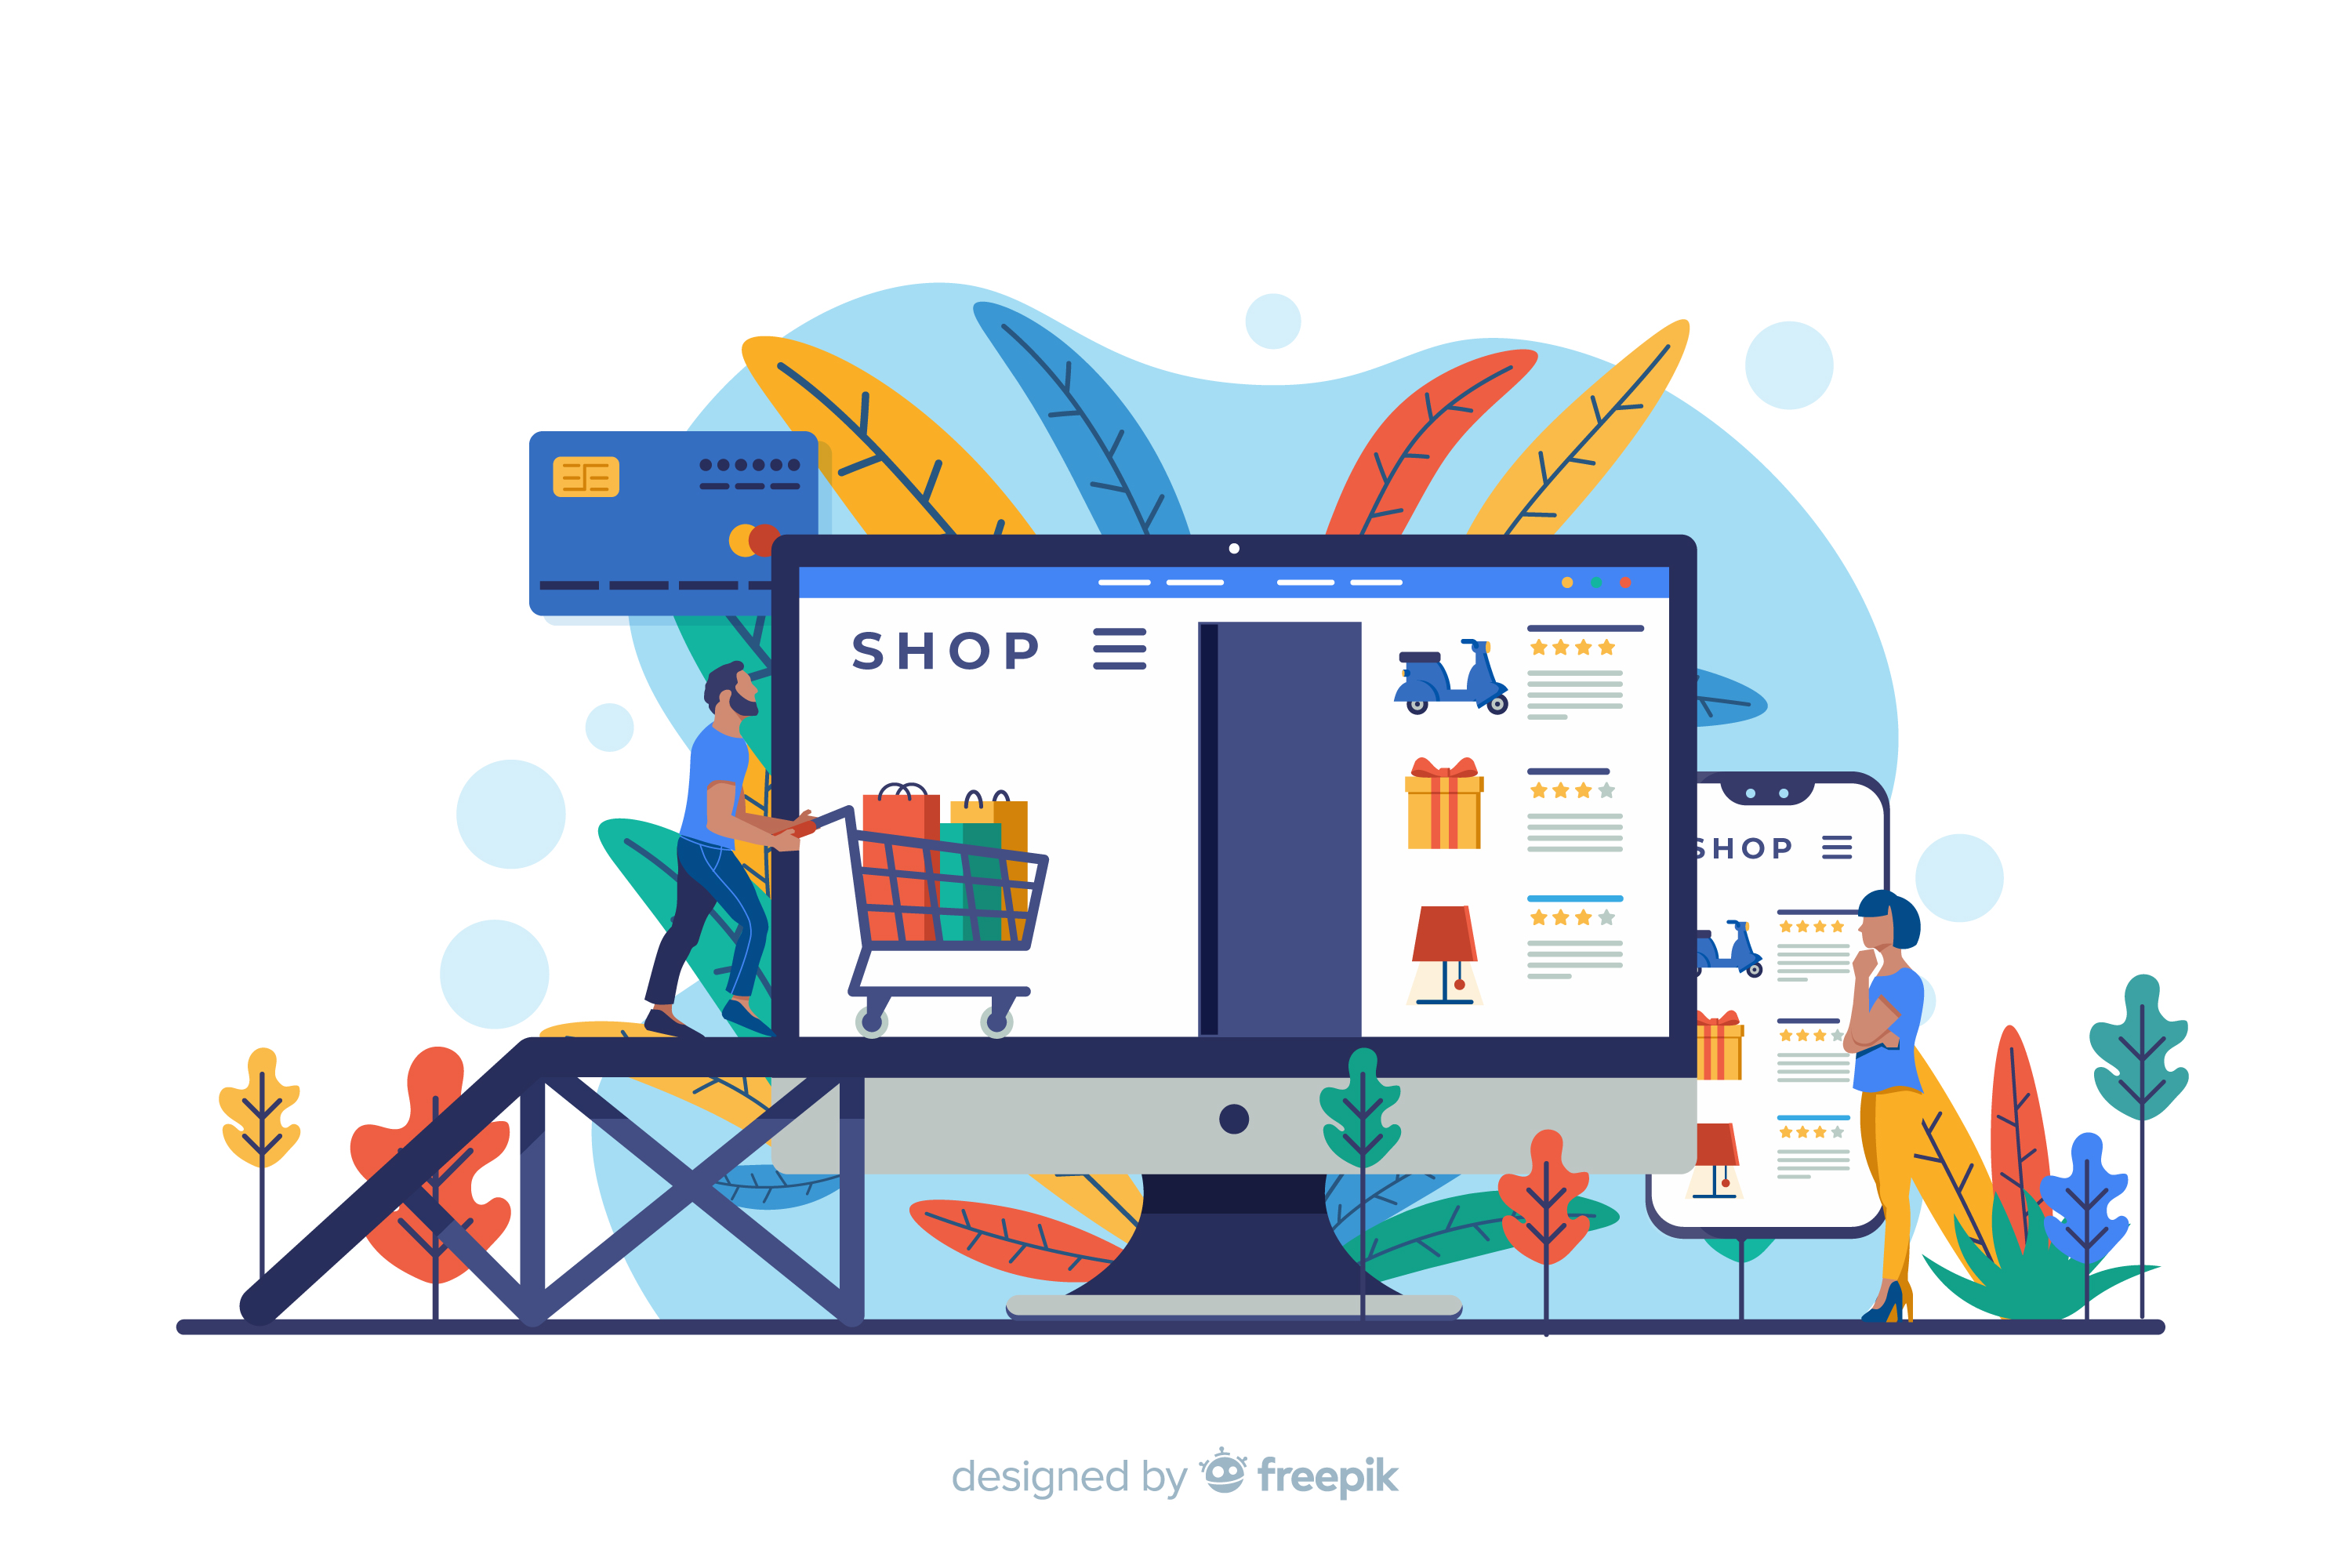 Shopify or Wix